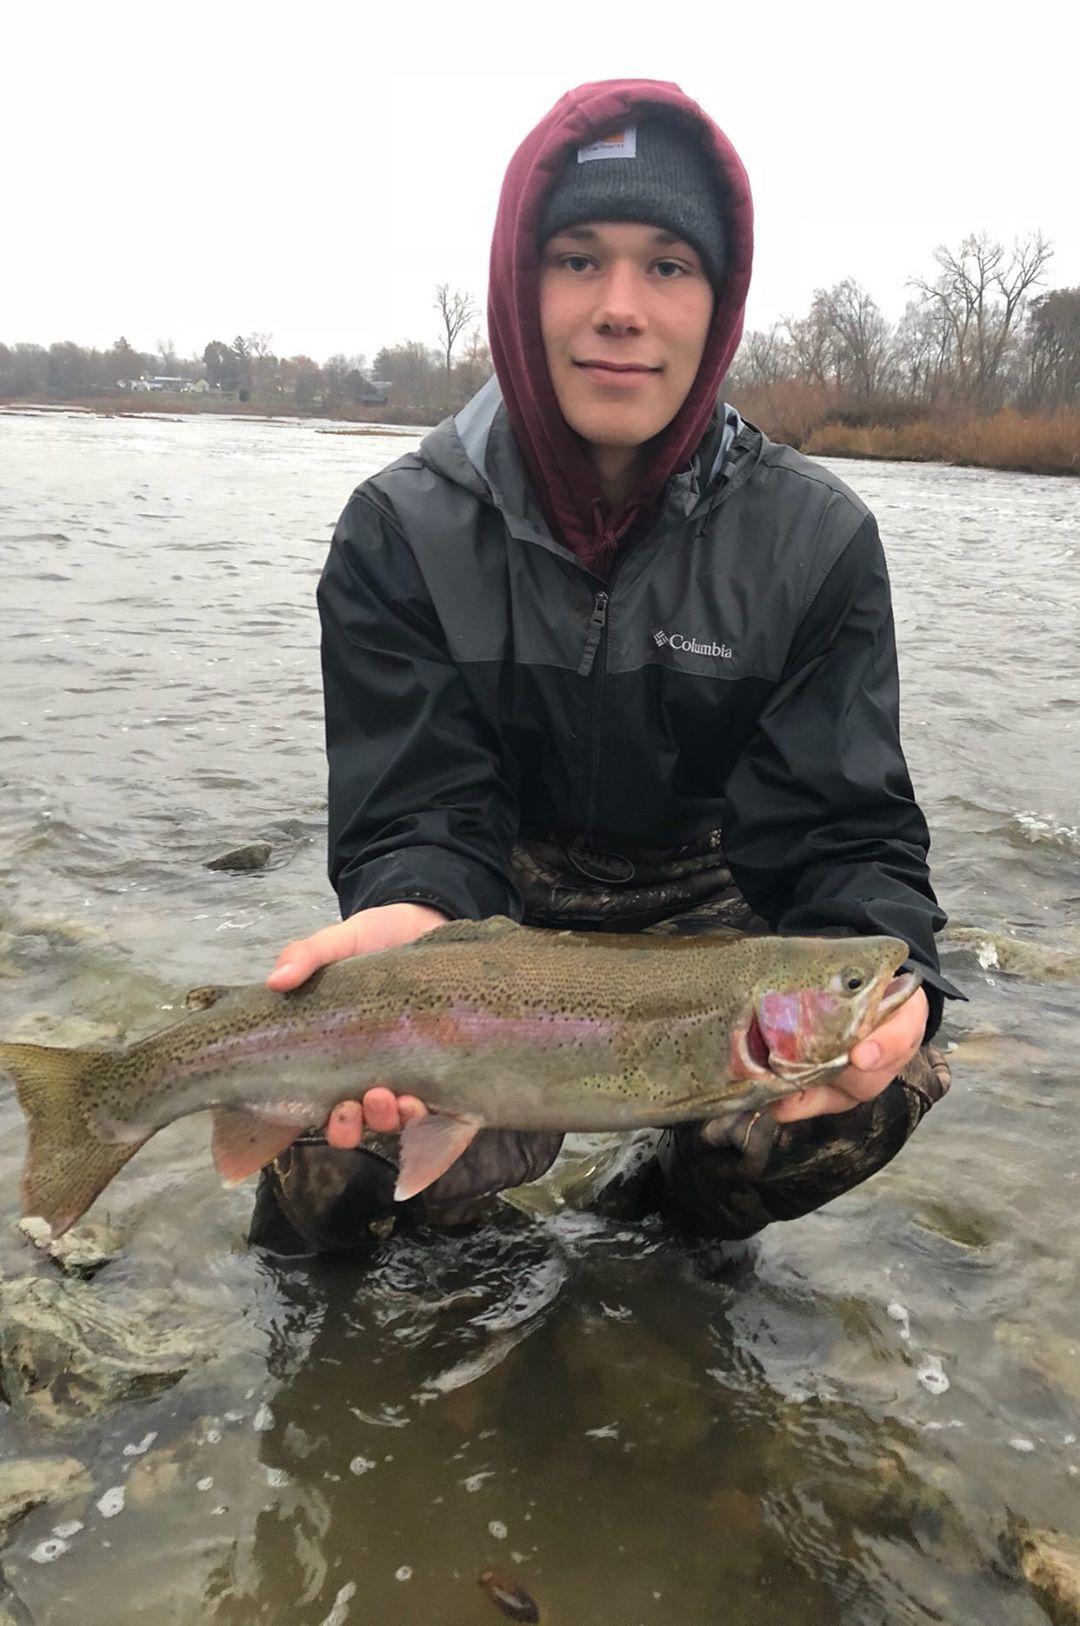 Maumee River Report- 22 November 2019- More weekend motvation.